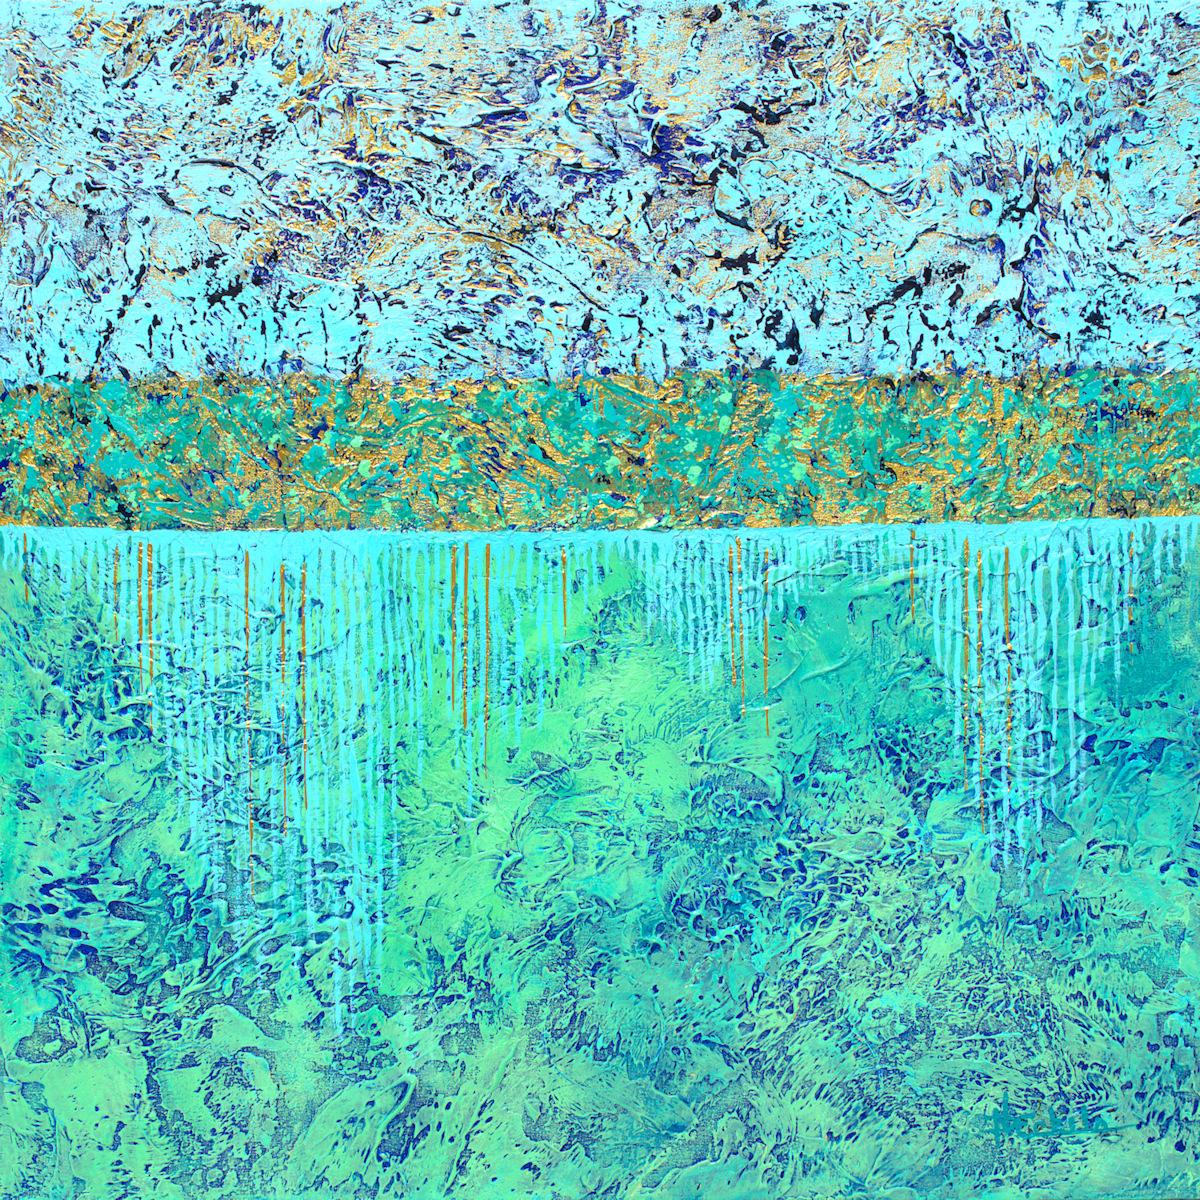 Nancy Eckels Abstract Painting - "Liquid Treasure" Mixed Media abstract with textural blues, teal, metallic gold